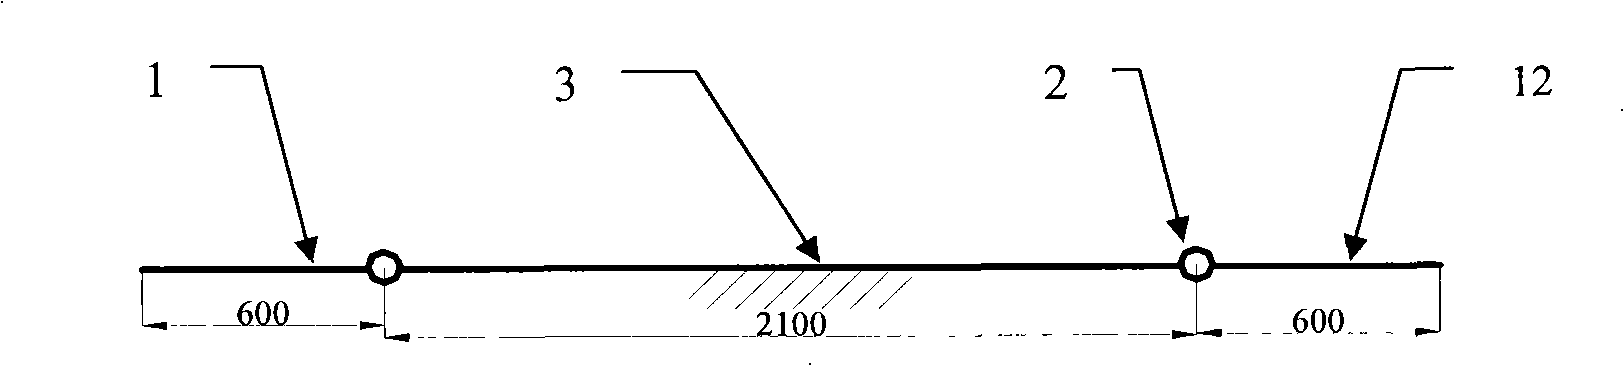 Foldable track detecting apparatus